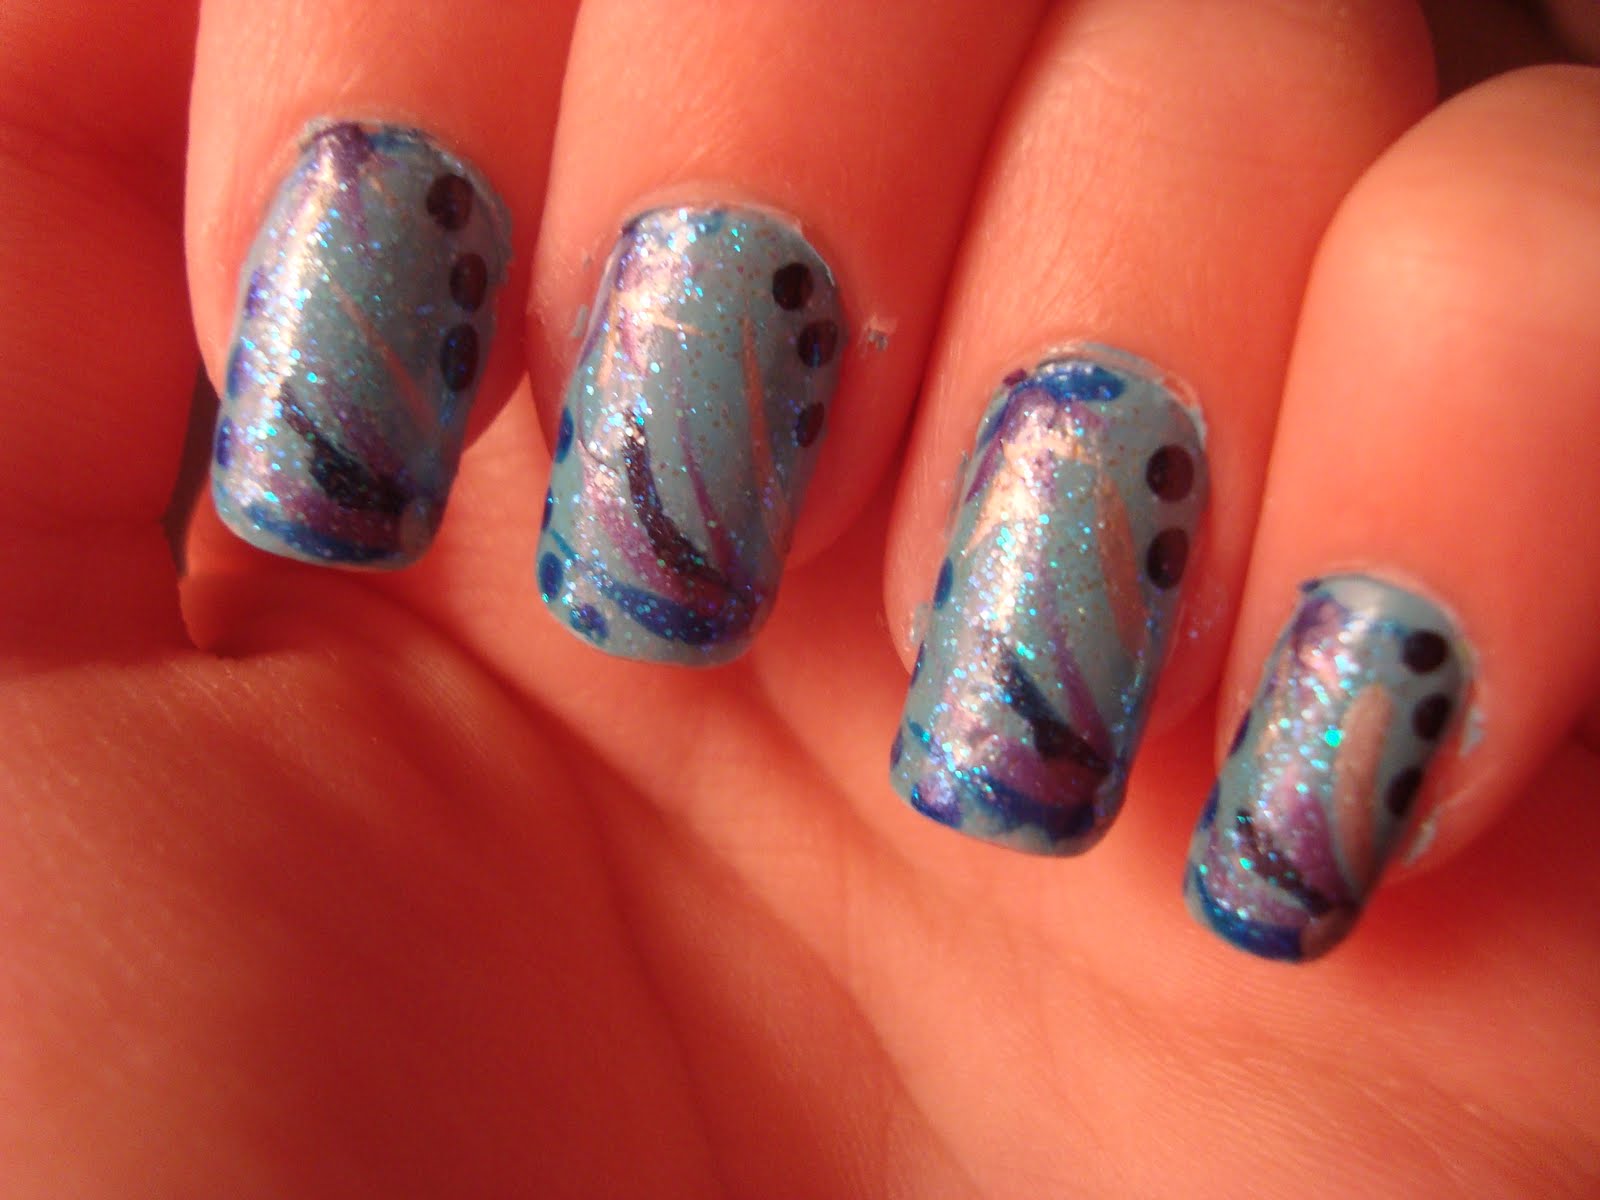 Yesterday I did my nails a blue background and some lines with dots